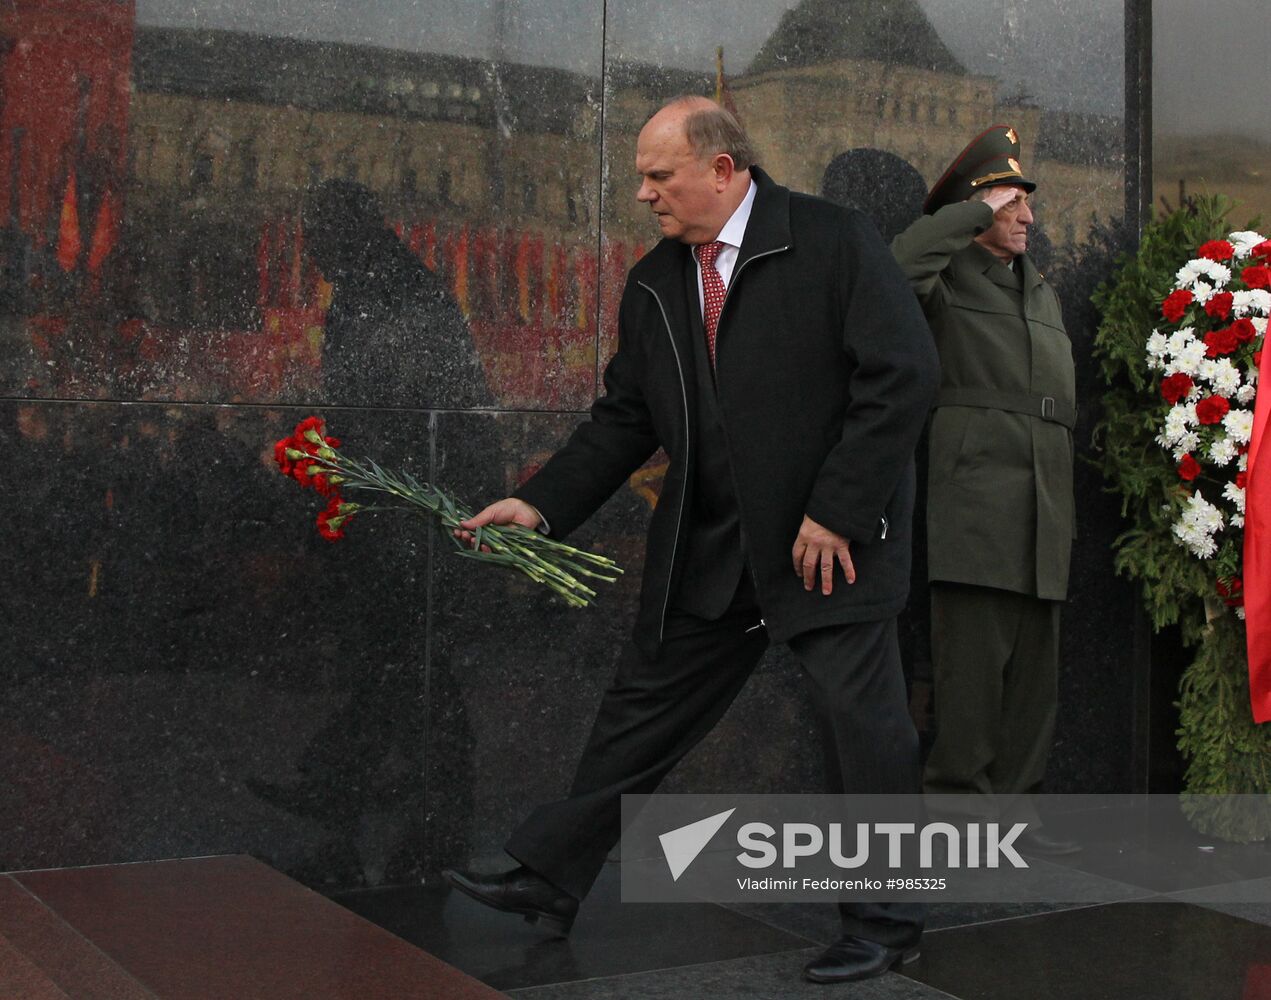 Laying flowers and wreaths to Lenin Mausoleum